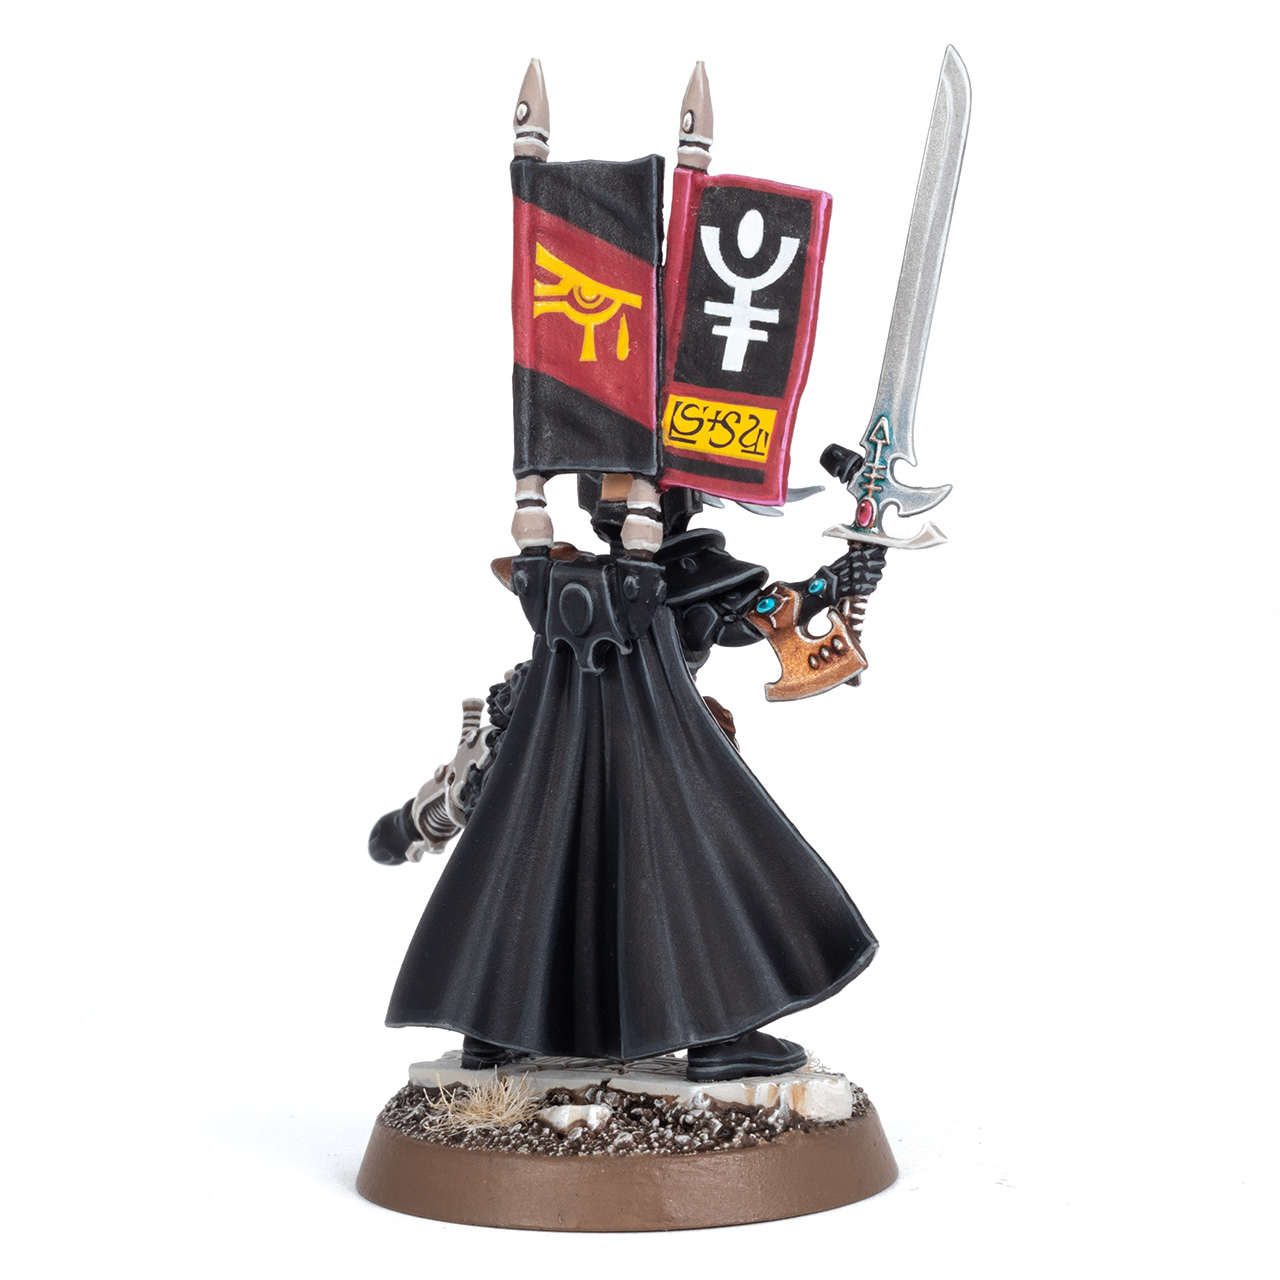 Back of an Eldar Autarch of Ulthwé, painted by Stahly